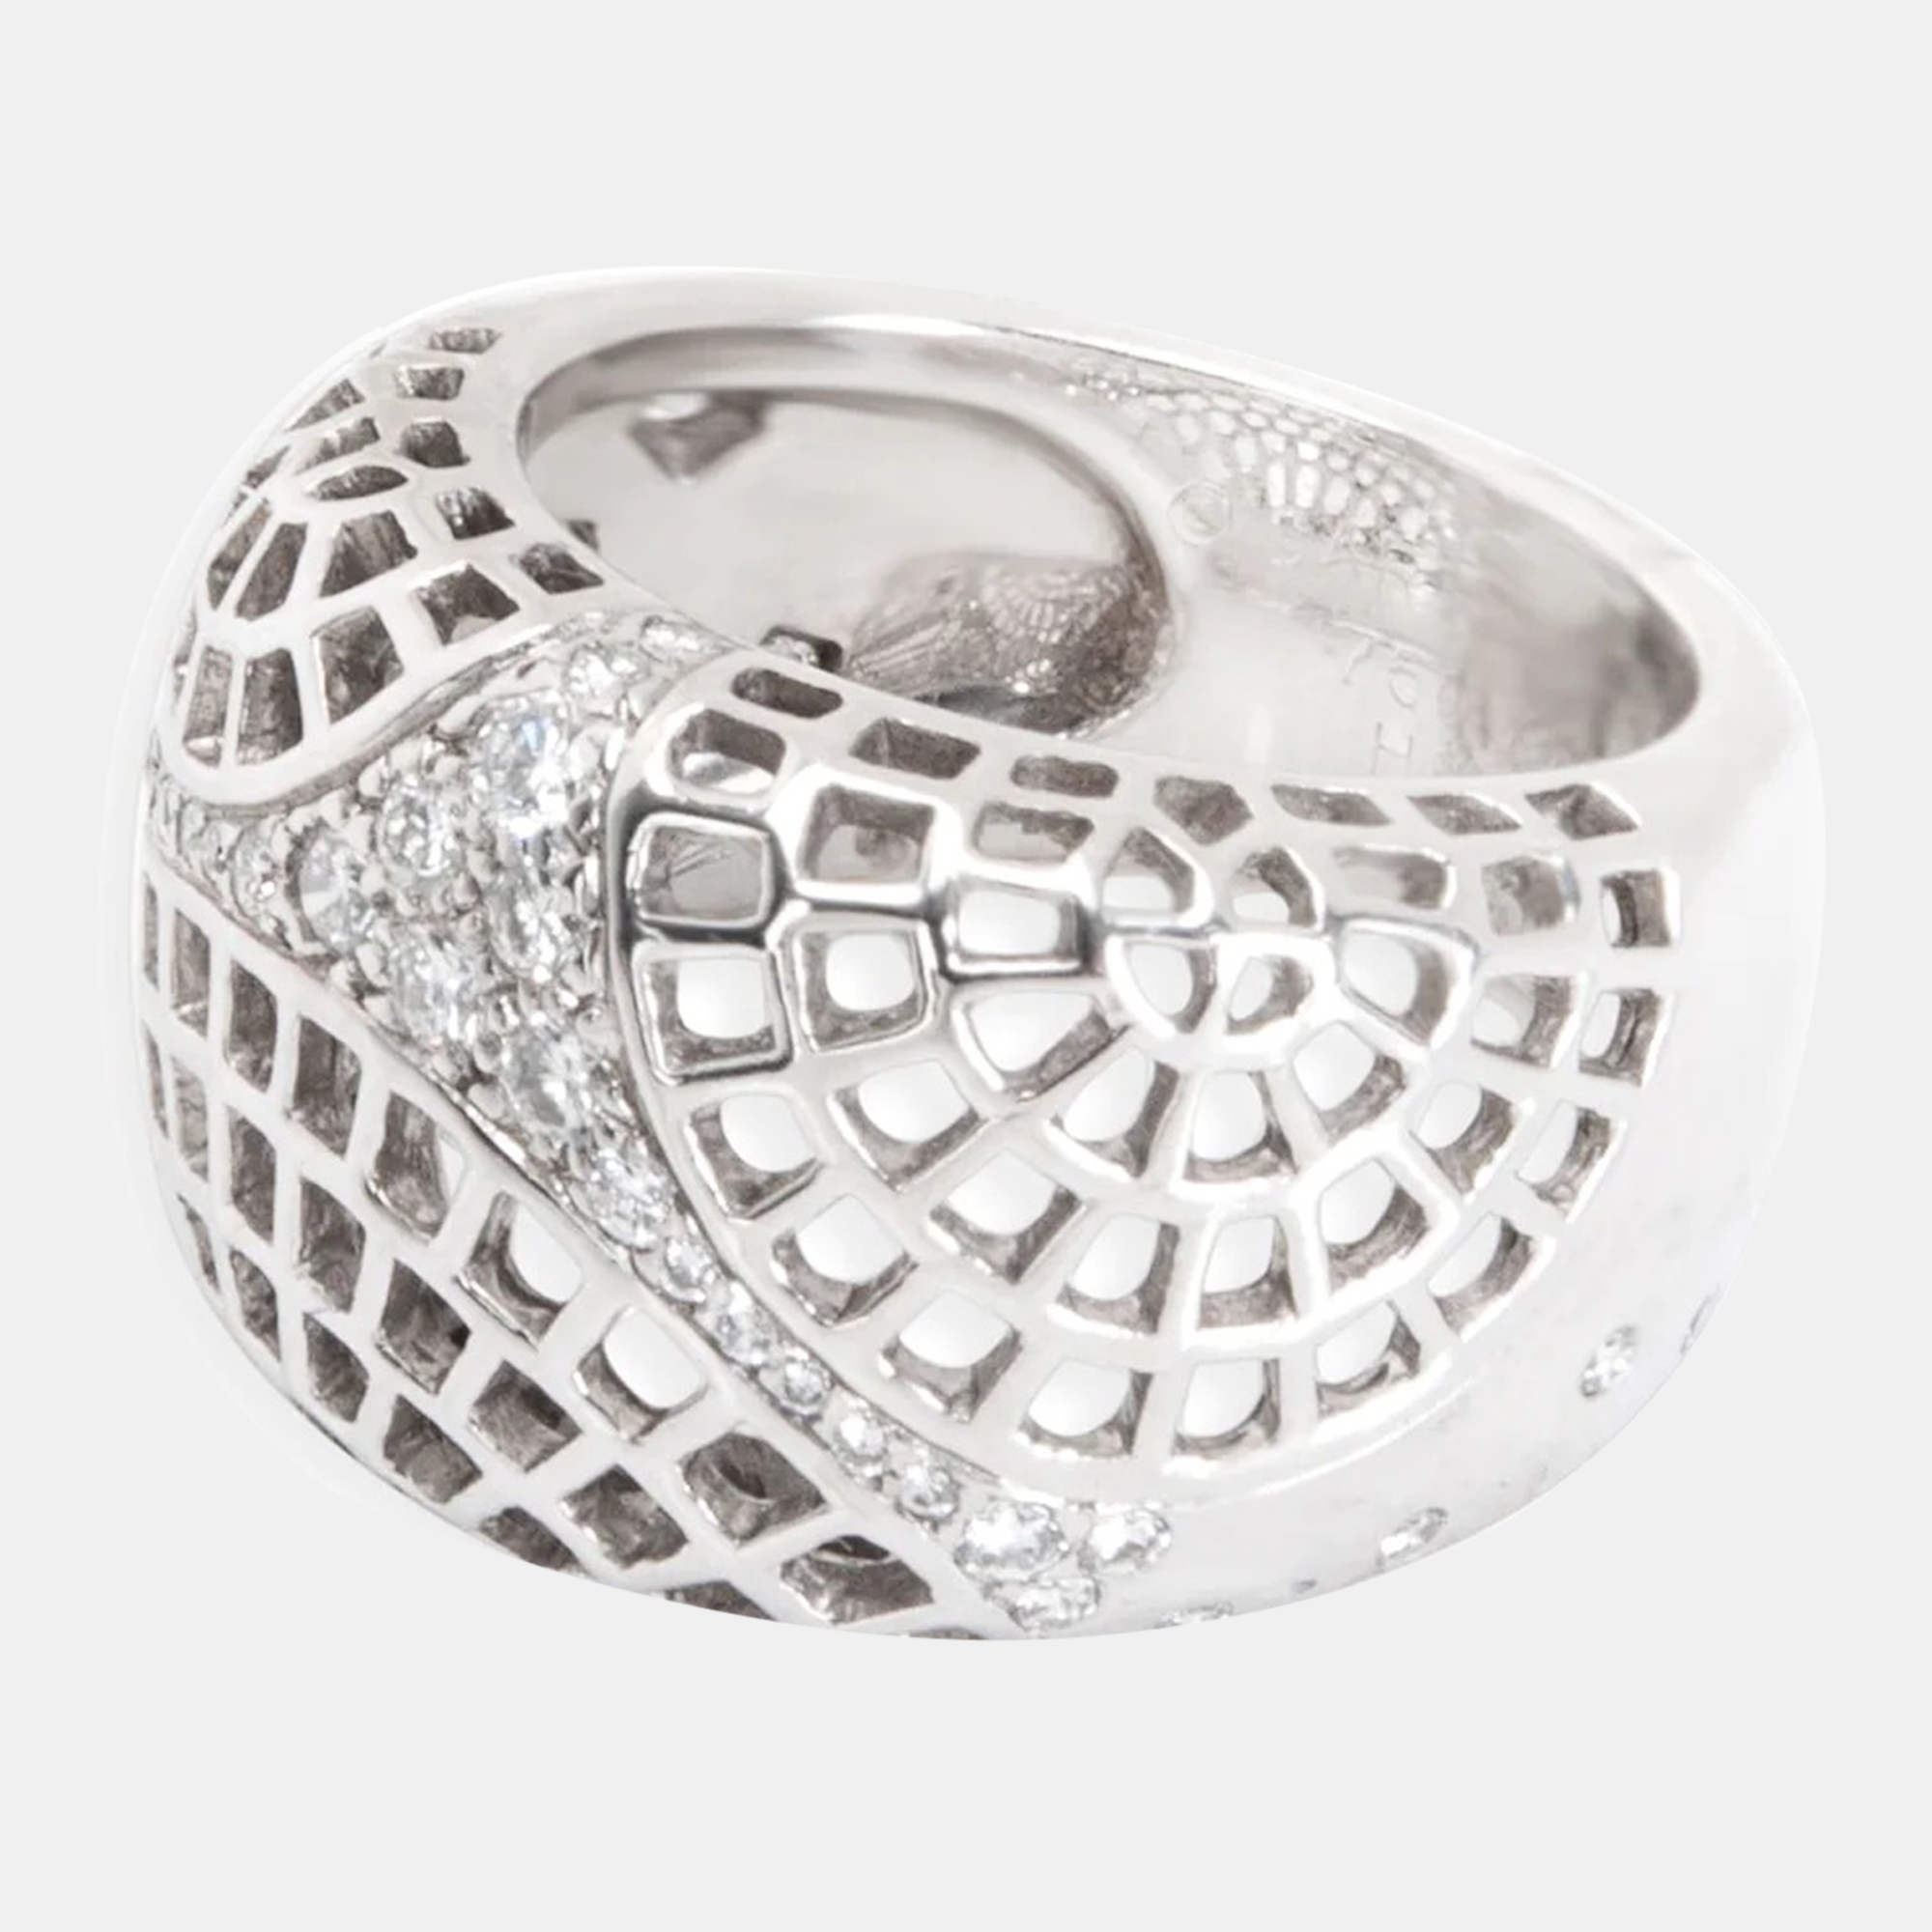   The Luxury Closet Cartier 18K White Gold, 0.45 Ctw Broiderie Diamond Dome Ring